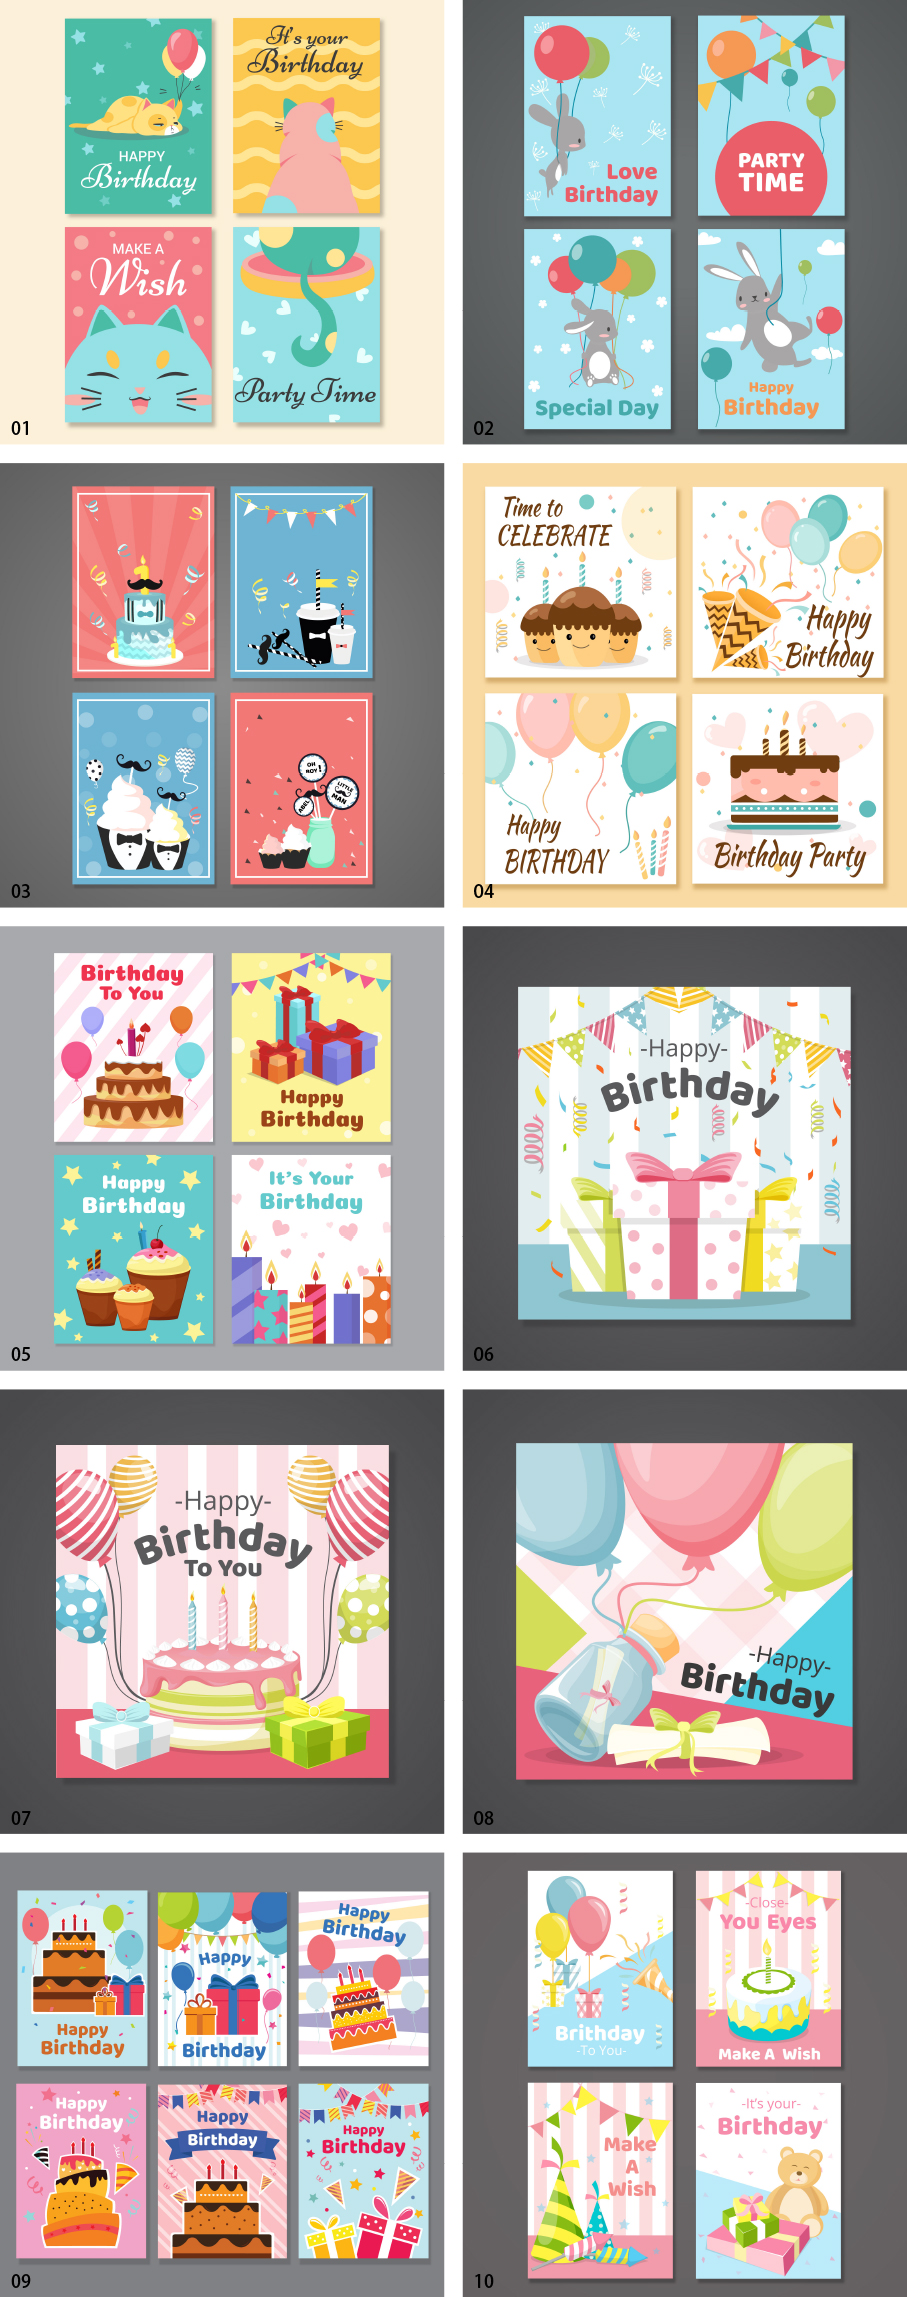 Birthday card template material